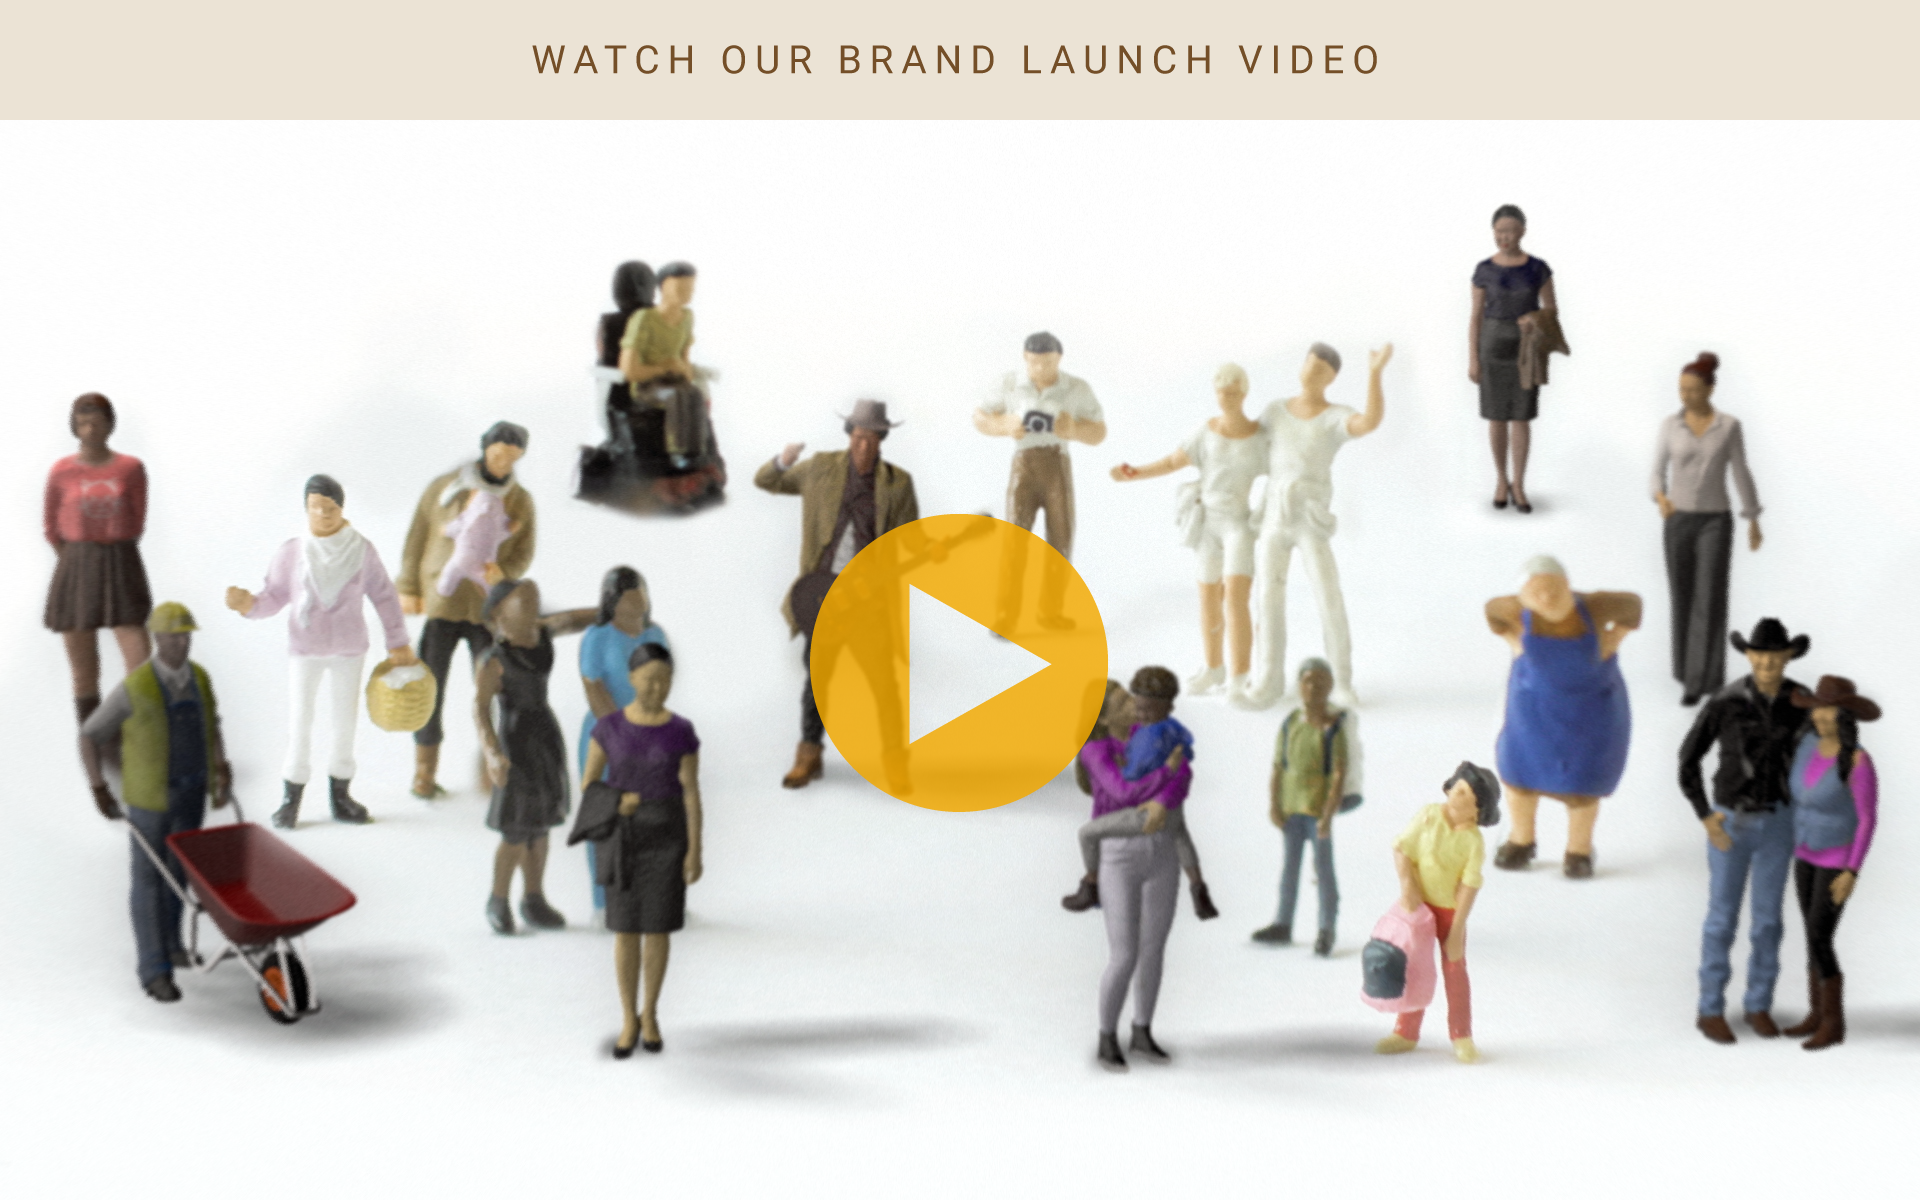 Every Texan - Watch our brand launch video